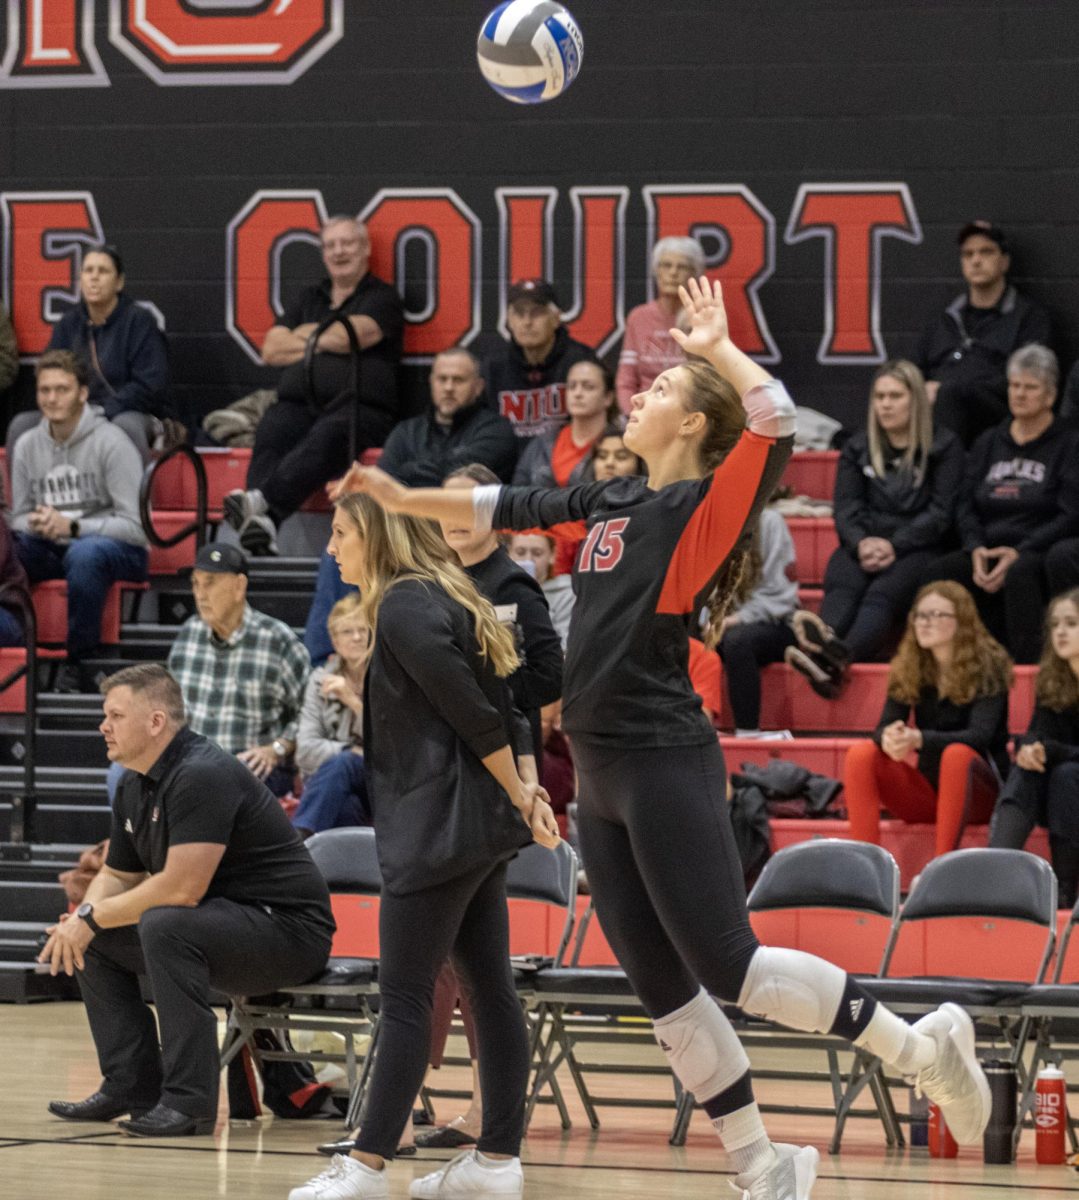 NIU senior setter Ella Mihacevich (15) jumps to serve the ball during NIU volleyballs match against the University of Akron on Oct. 27. The Huskies are preparing to close out their season against first-place Western Michigan on Wednesday. (Tim Dodge | Northern Star)